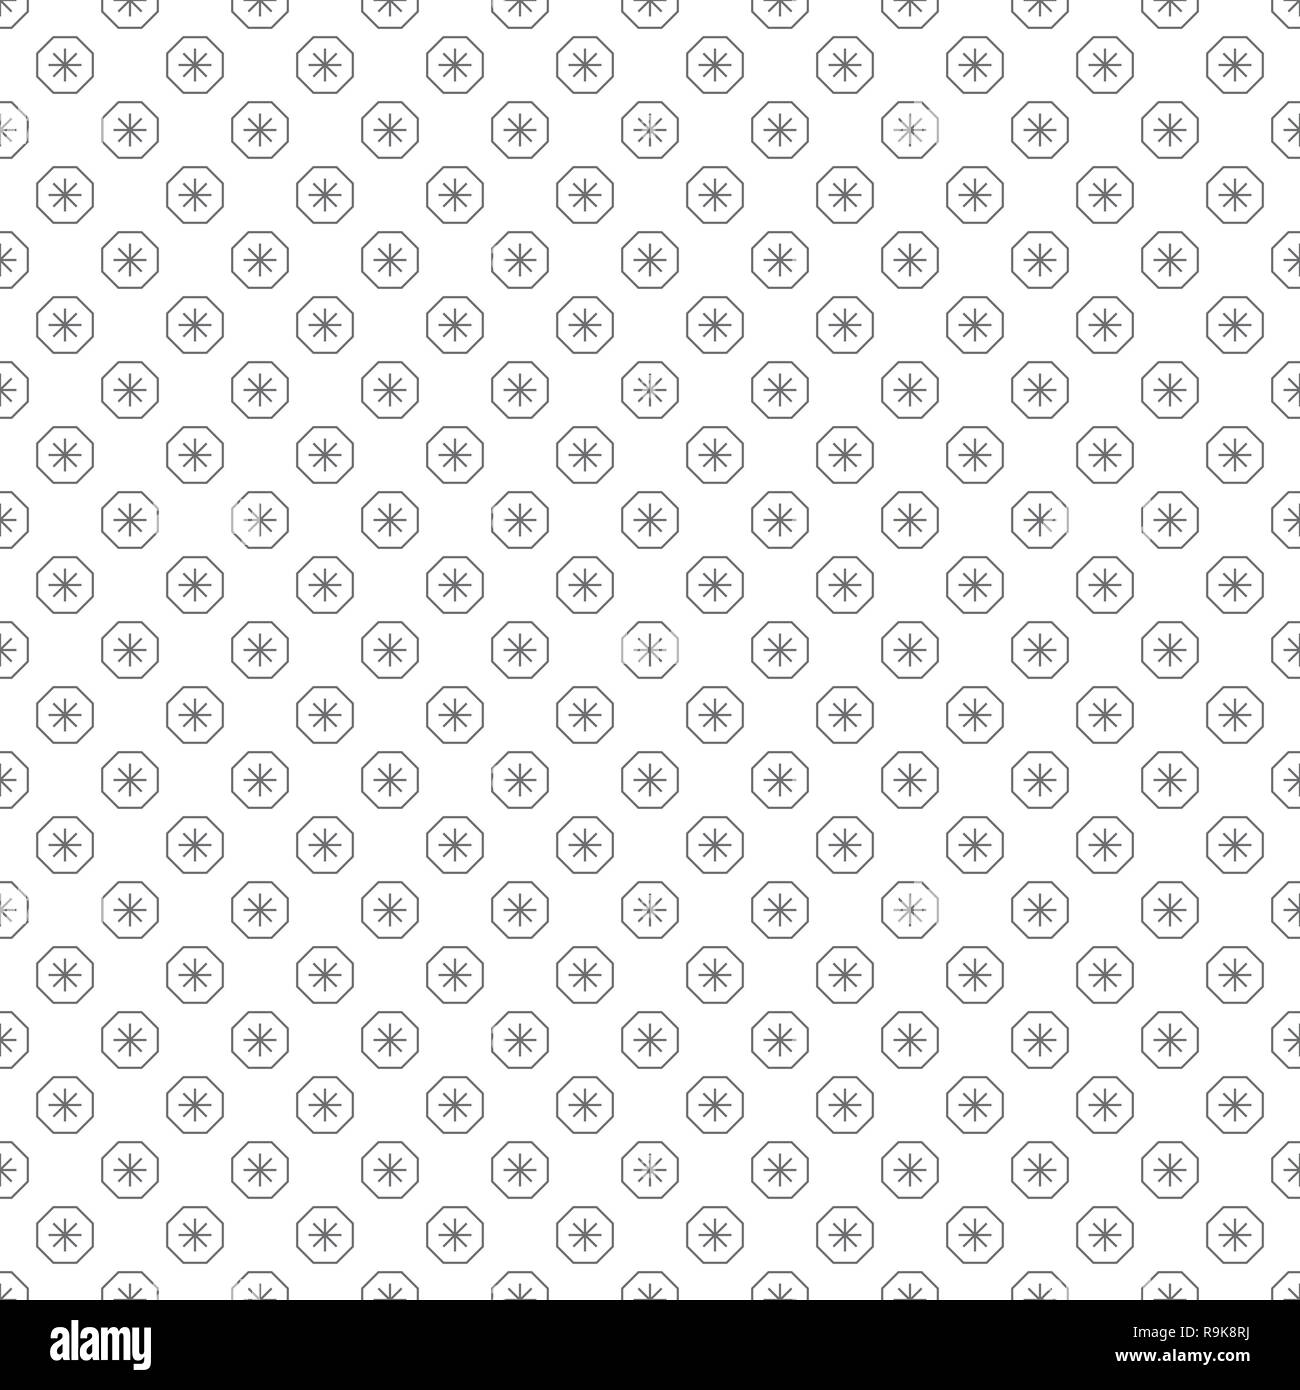 Vector seamless pattern. Minimalist simple geometrical texture. Repeating stars, hexagons. Surface for wrapping paper, shirts, cloths. Minimal modern  Stock Vector